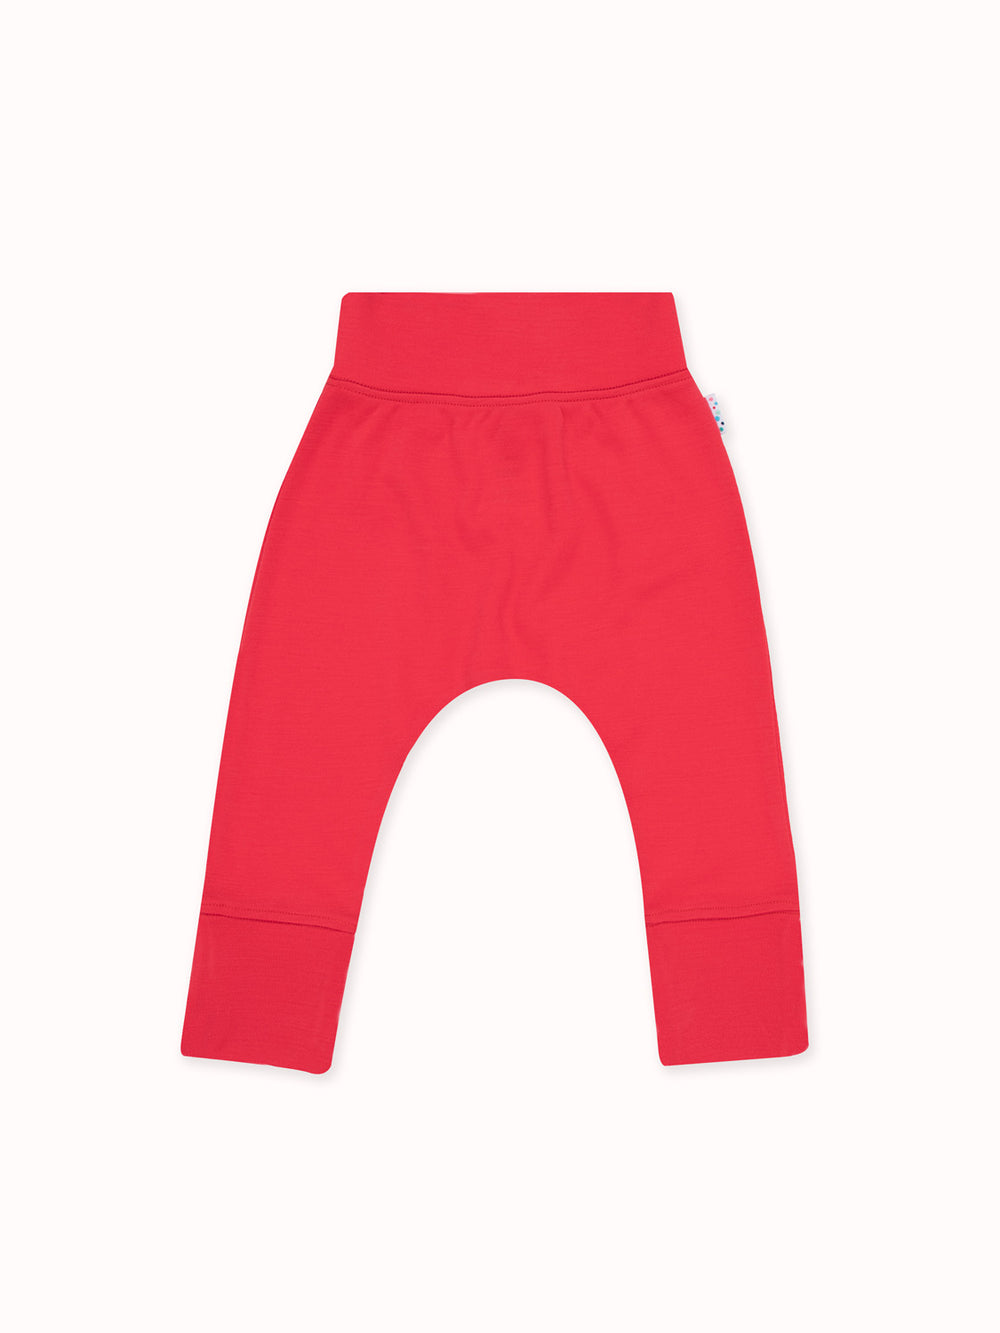 Imperfect Baby Merino Legging Imperfect Superlove Outlet Soft Red